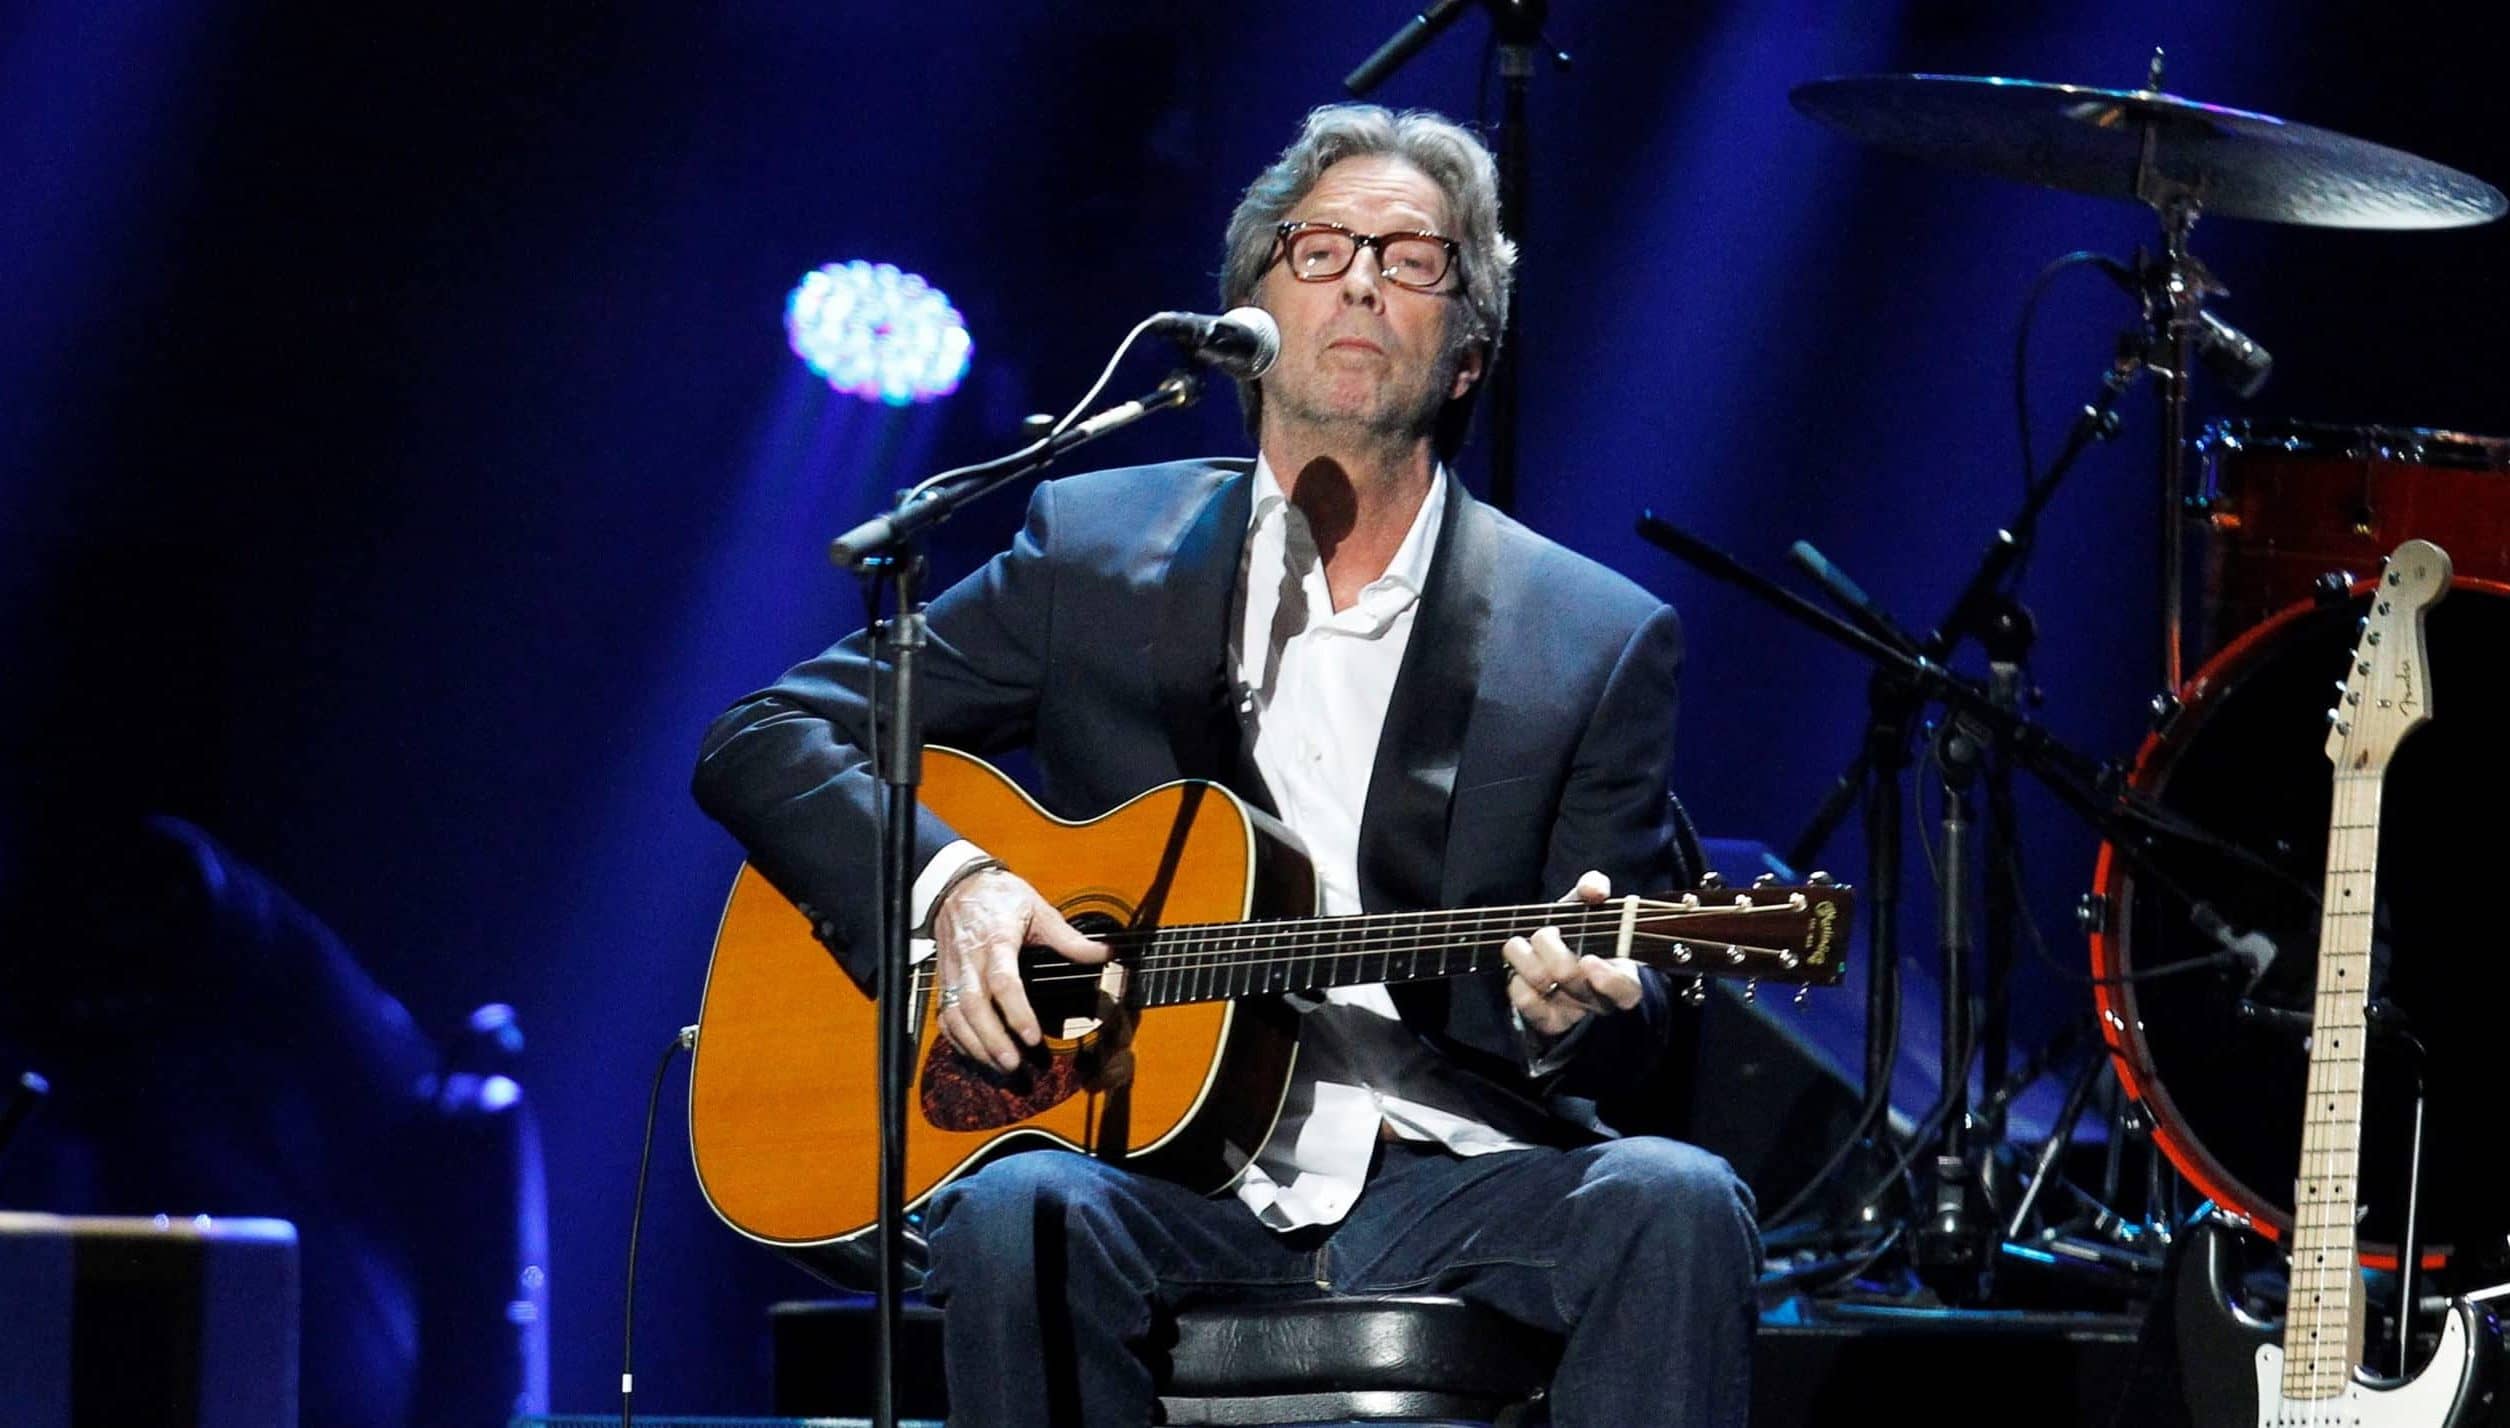 eric-clapton-performs-during-the-12-12-12-benefit-concert-for-victims-of-superstorm-sandy-at-madison-square-garden-in-new-york-2